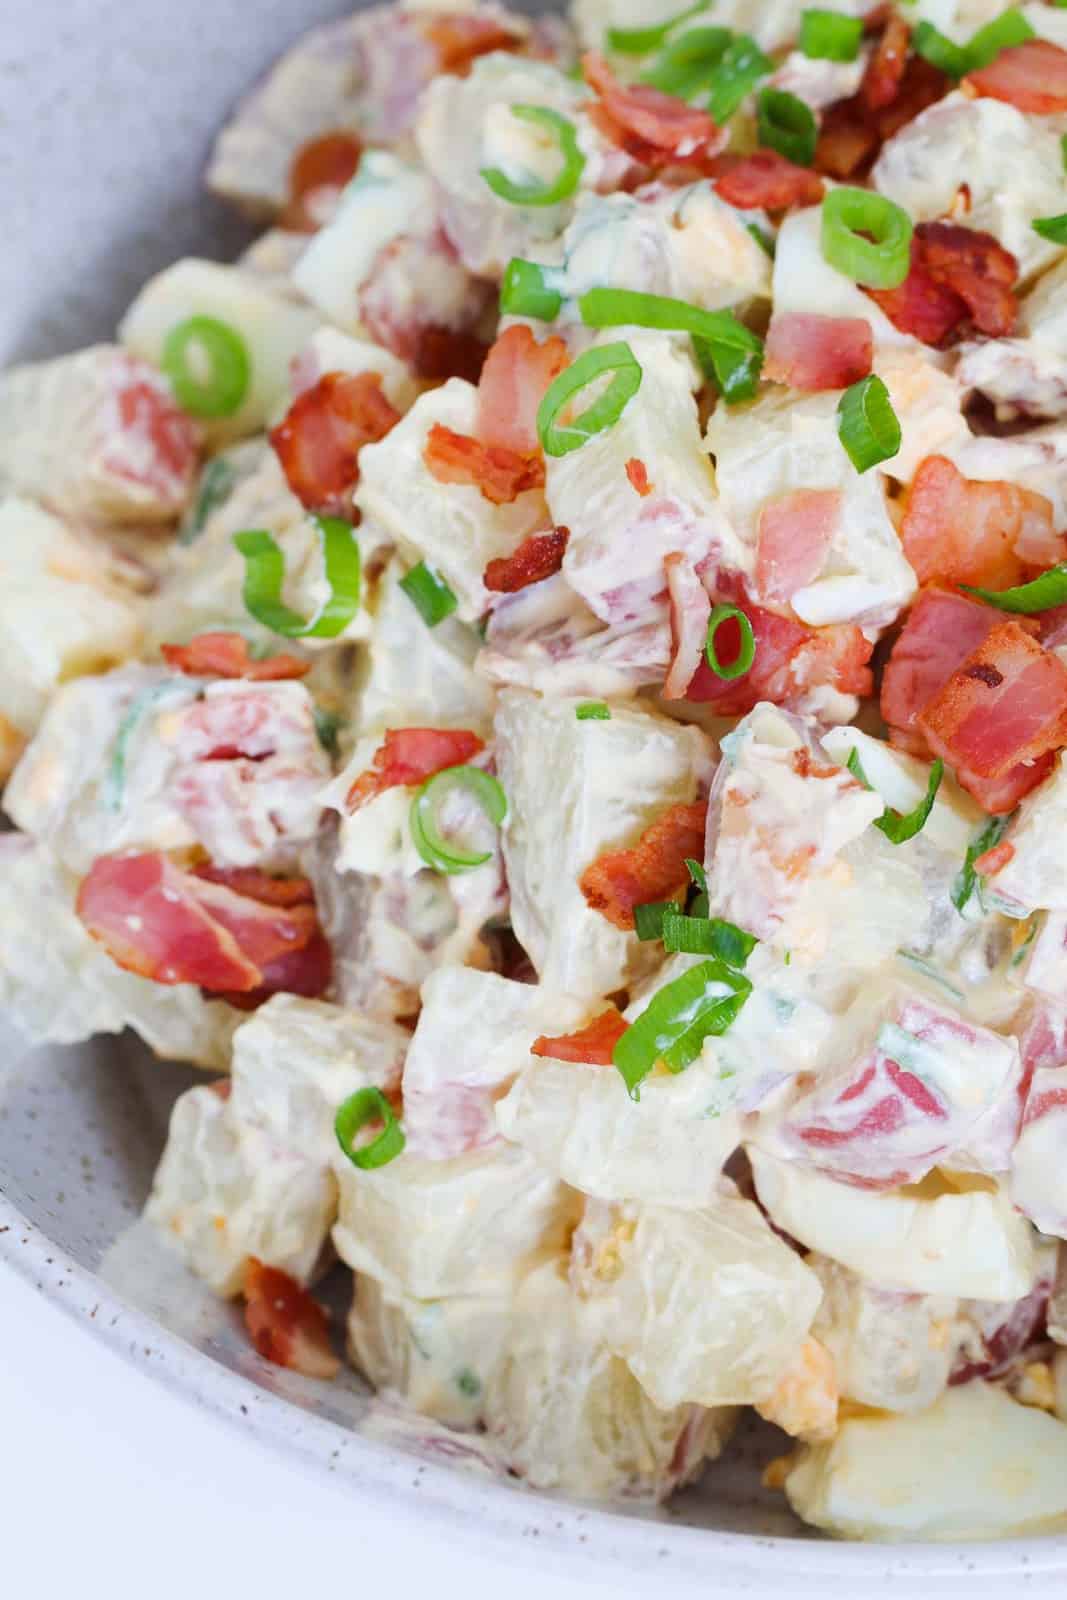 A creamy sauce coating potatoes, eggs, spring onions and bacon.